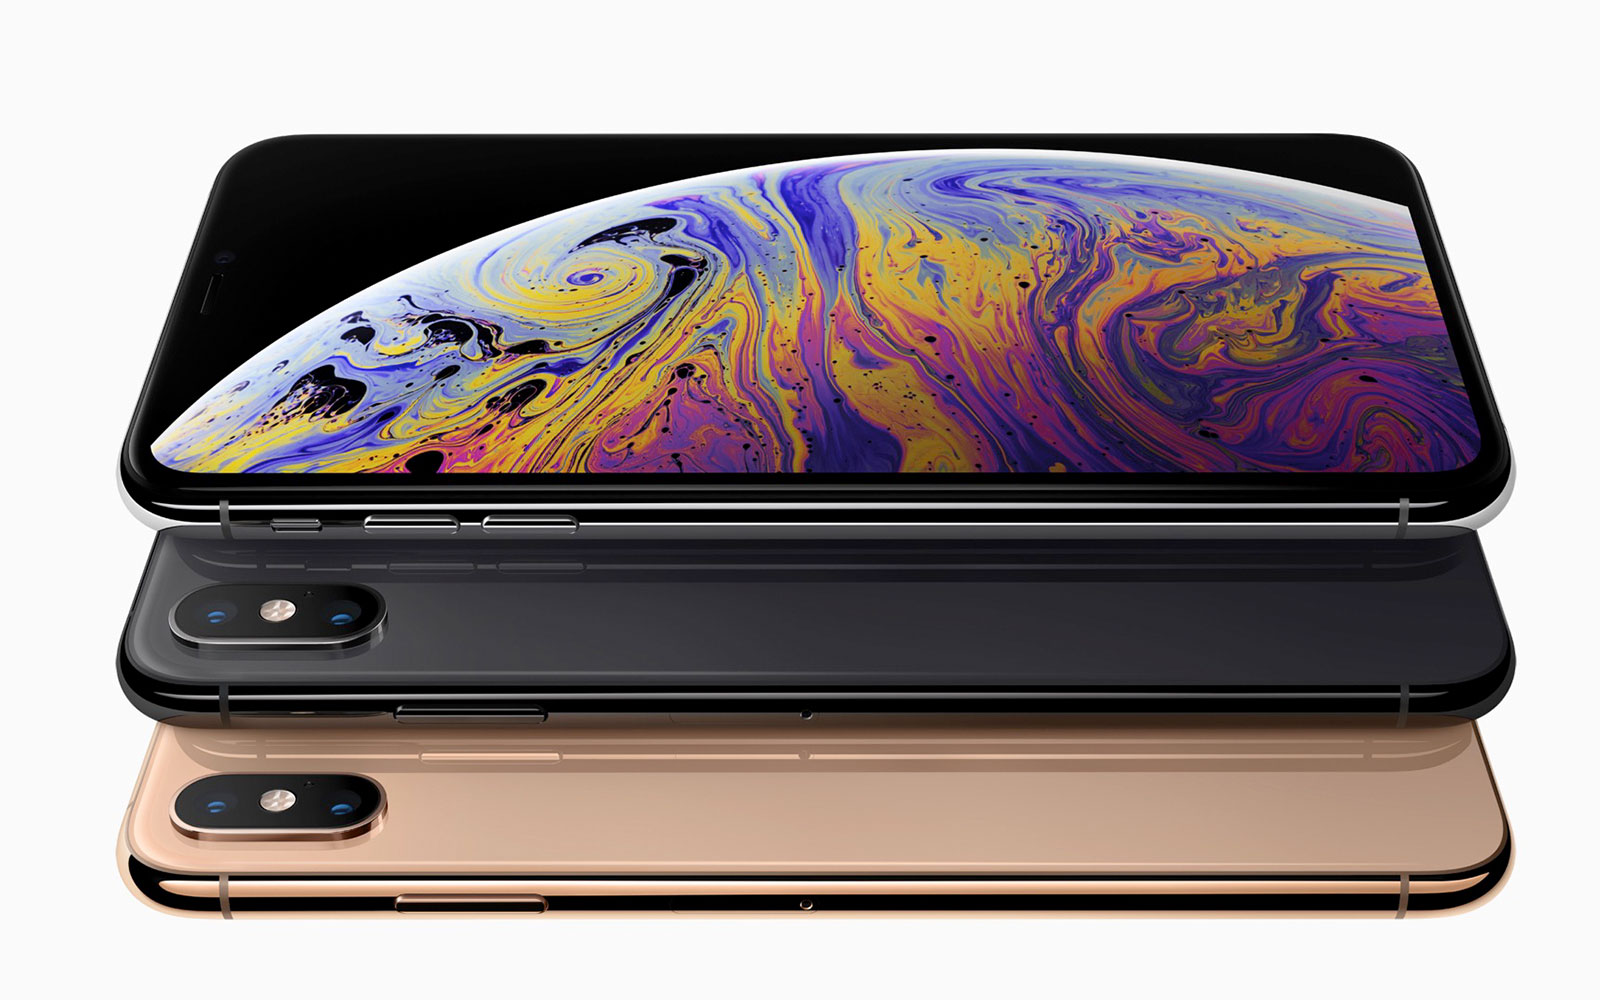 Apple’s iPhone Xs and Xs Max are all about the display